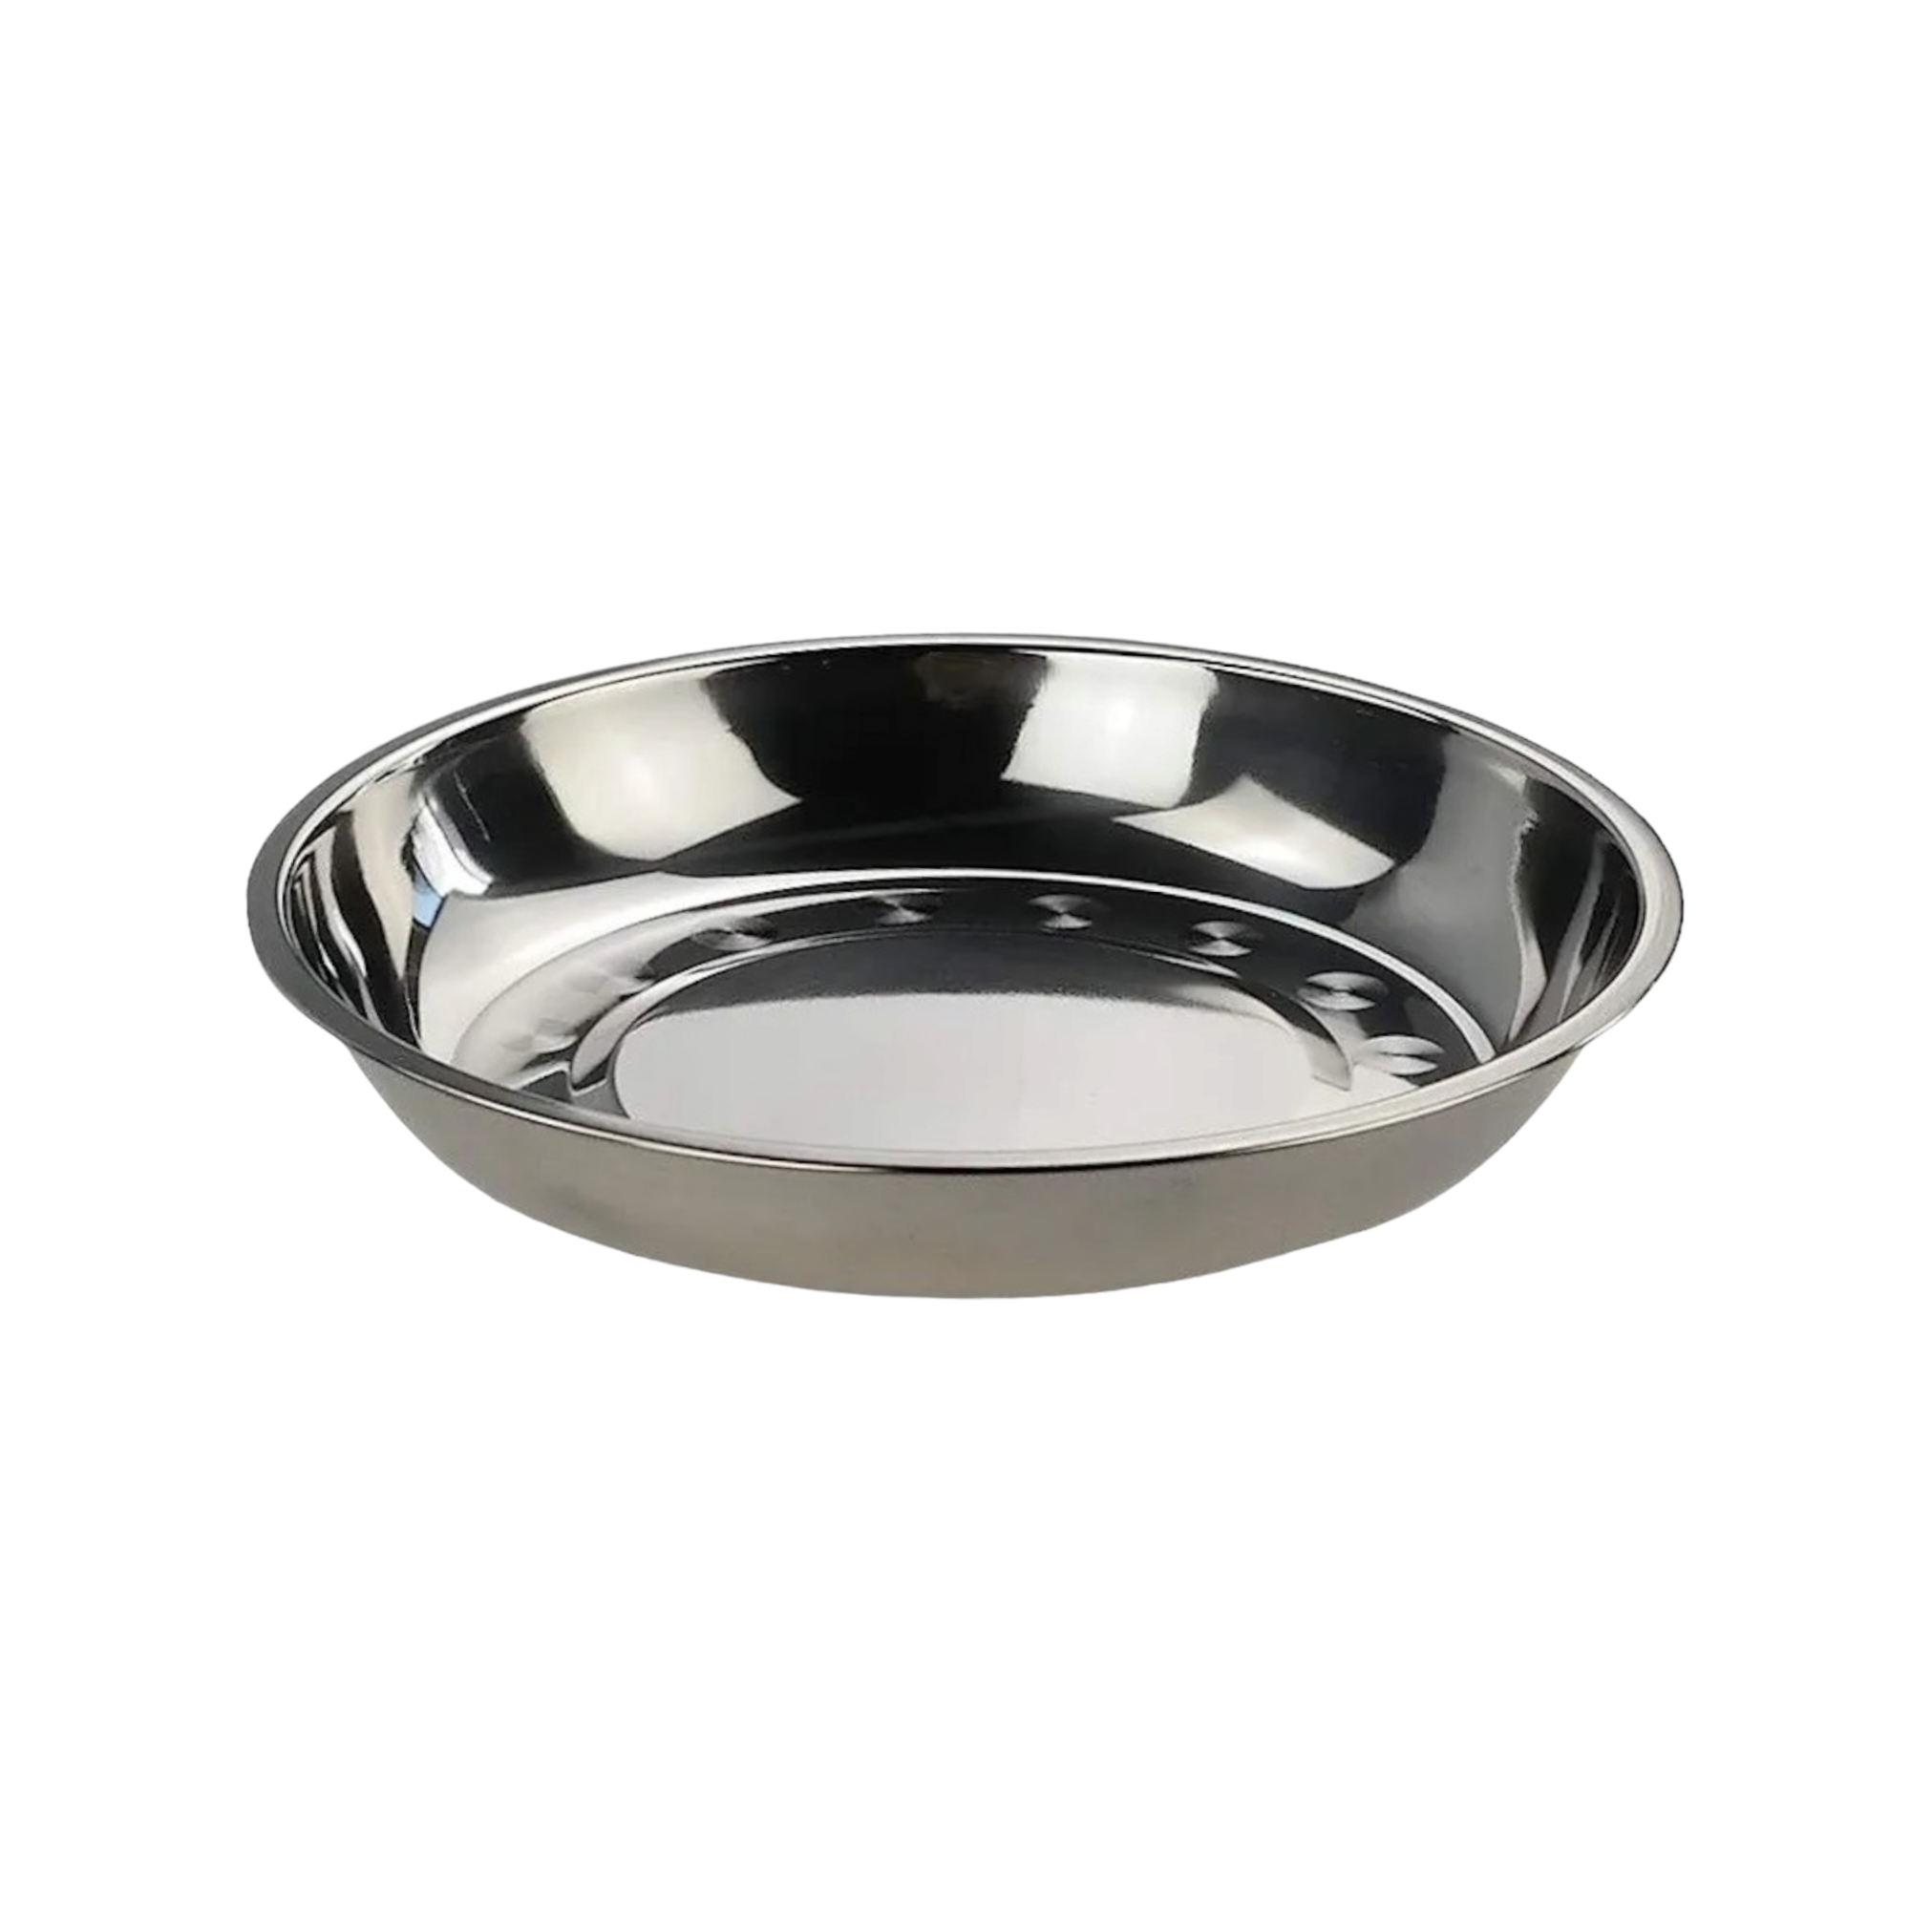 Serving Plate Round Stainless Steel